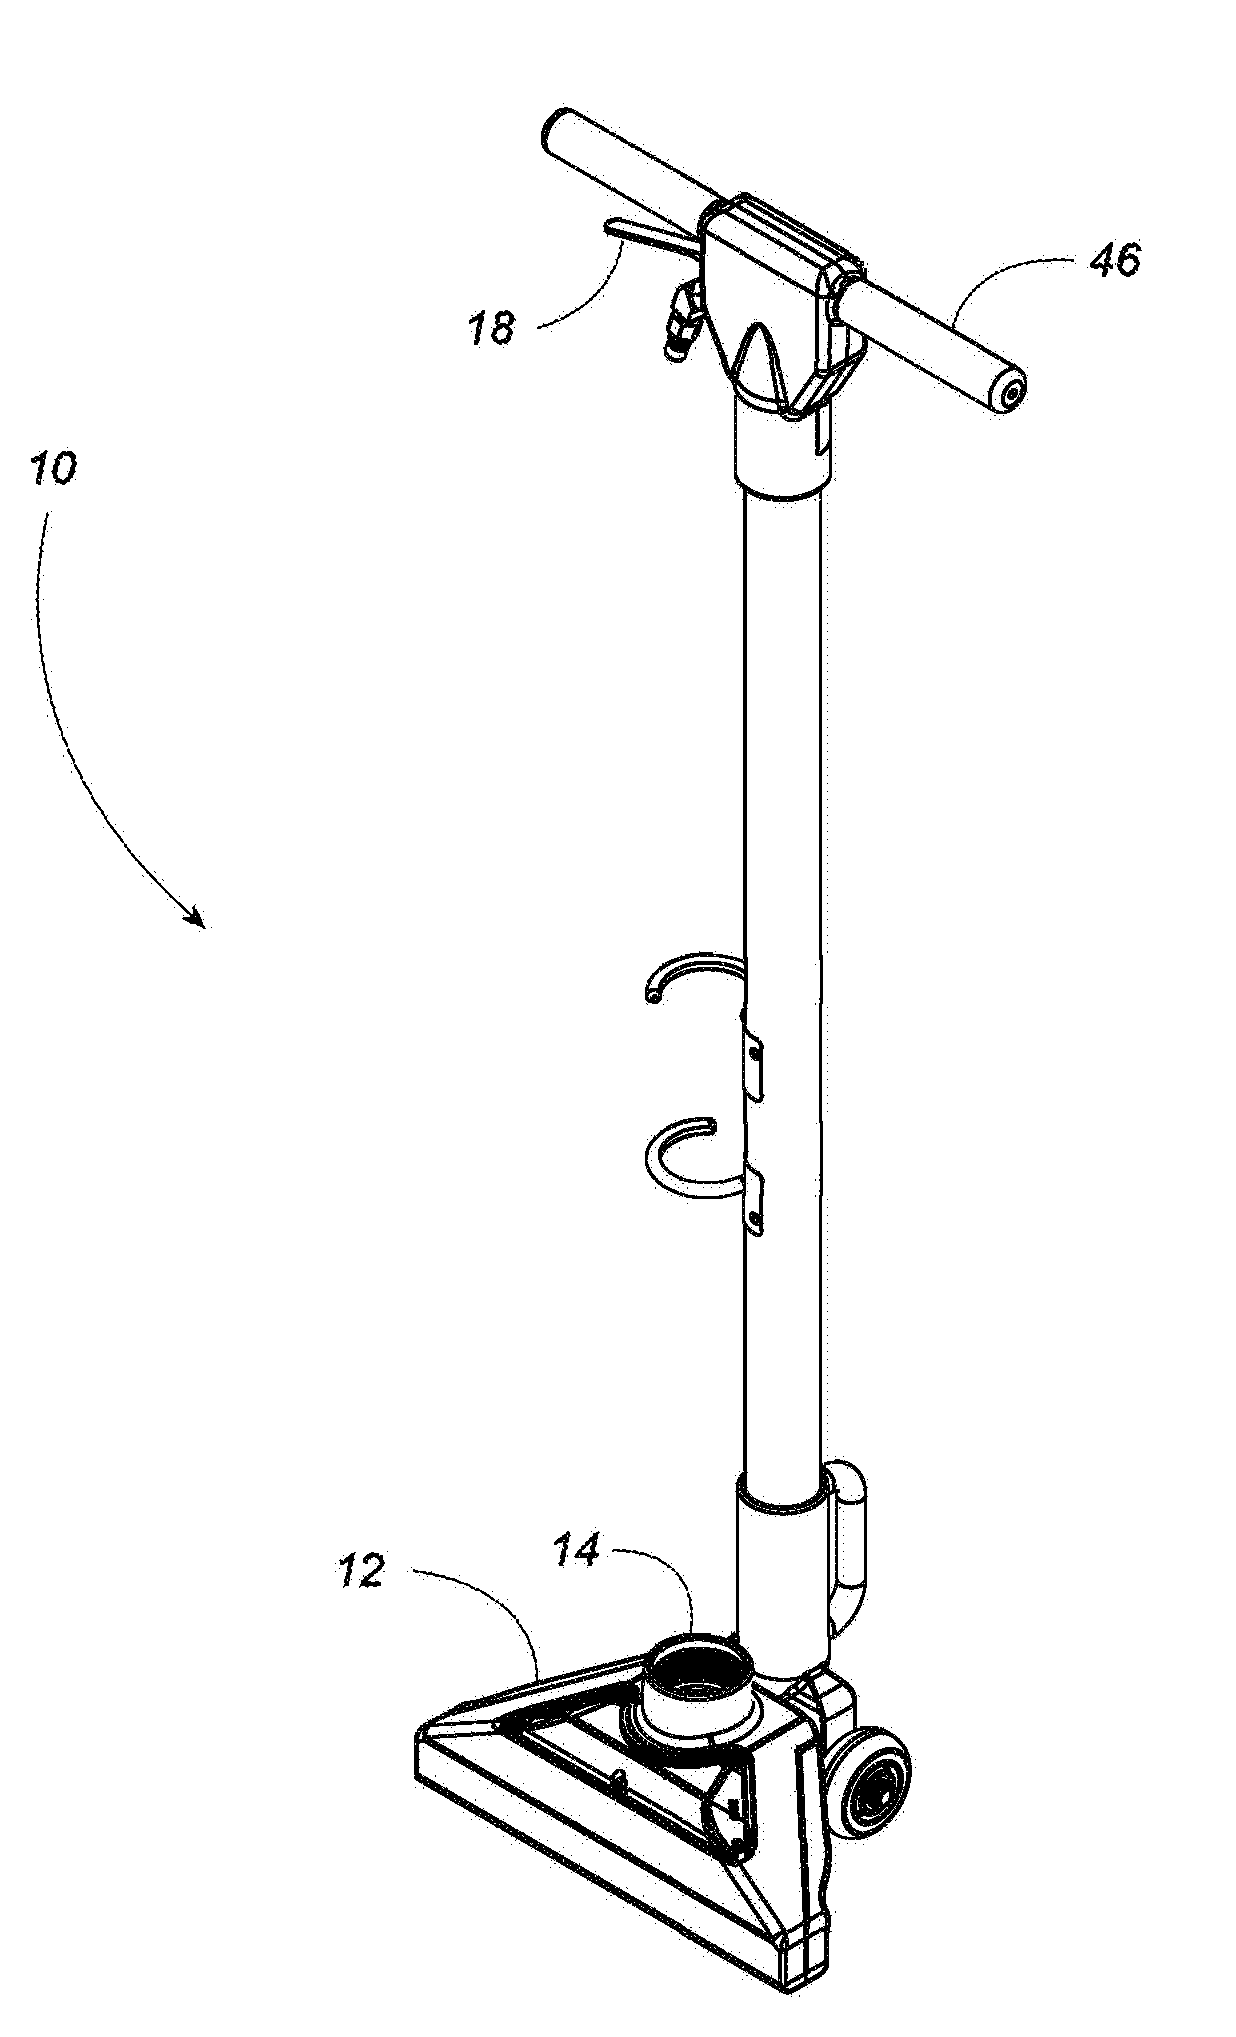 Surface cleaning machine having double glide apparatus